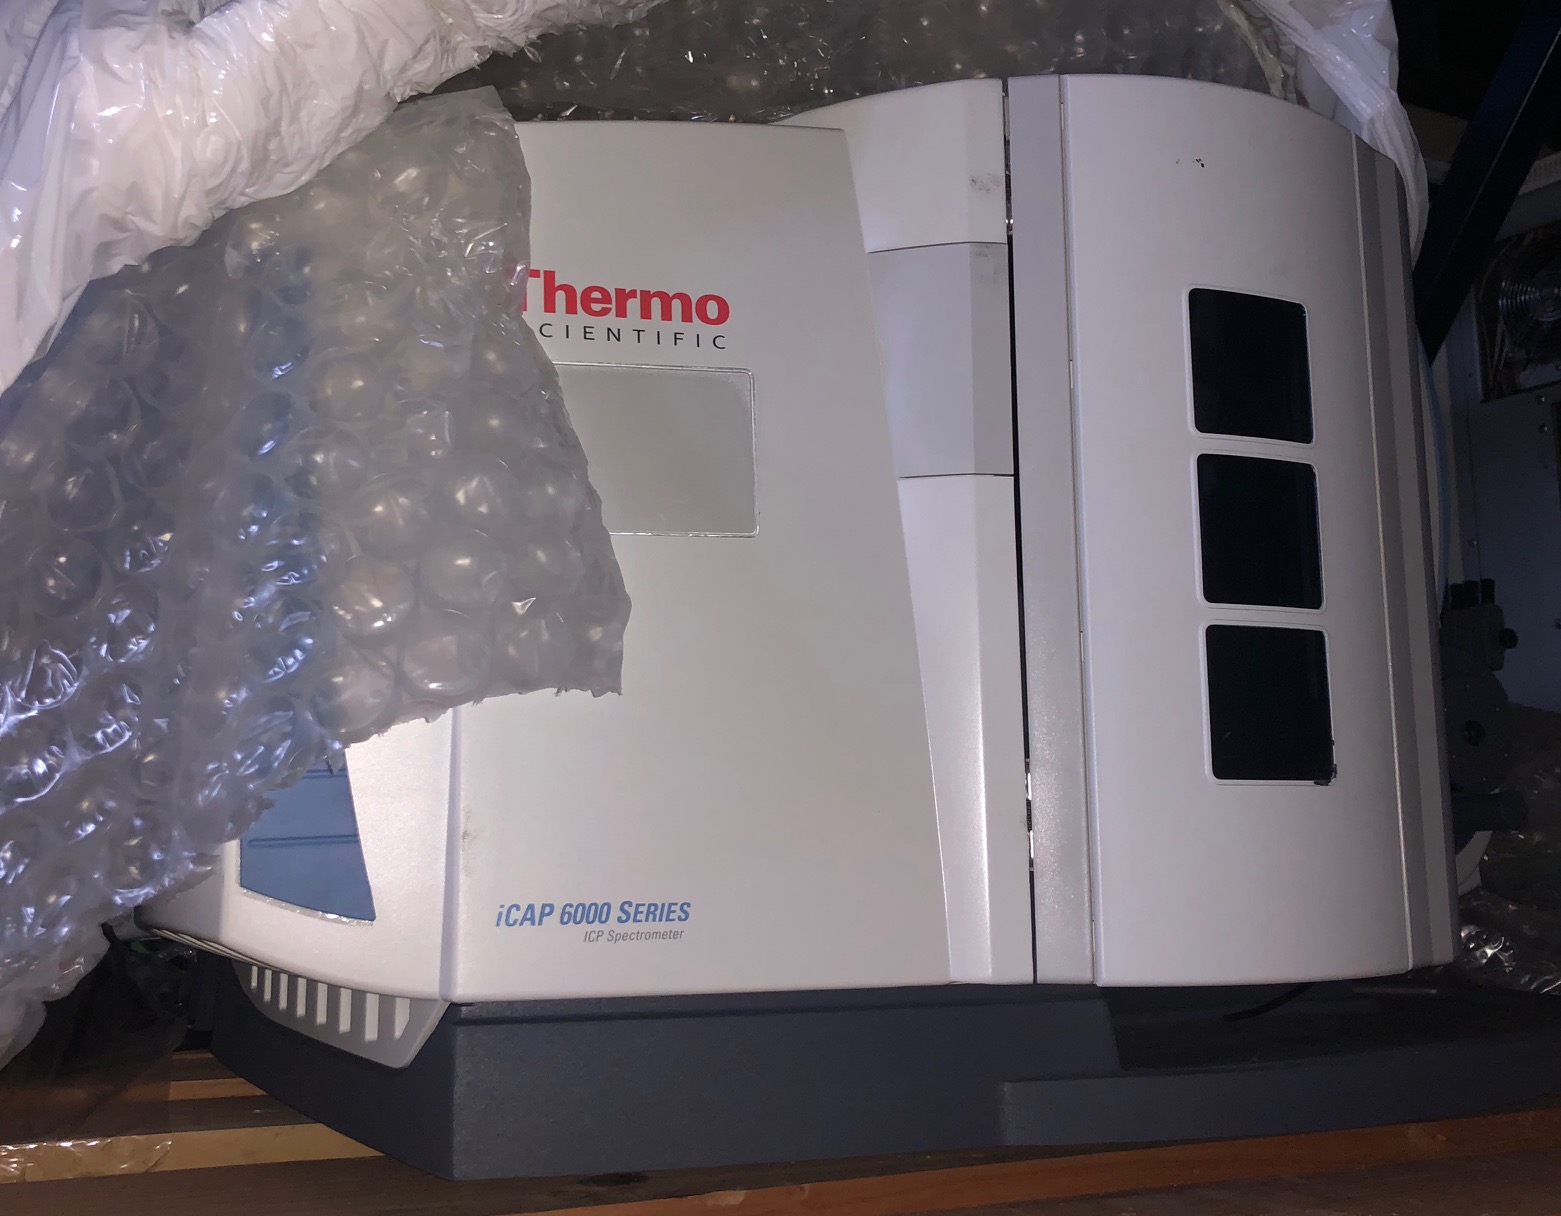 Thermo iCAP 6300 Radial Spectrometer